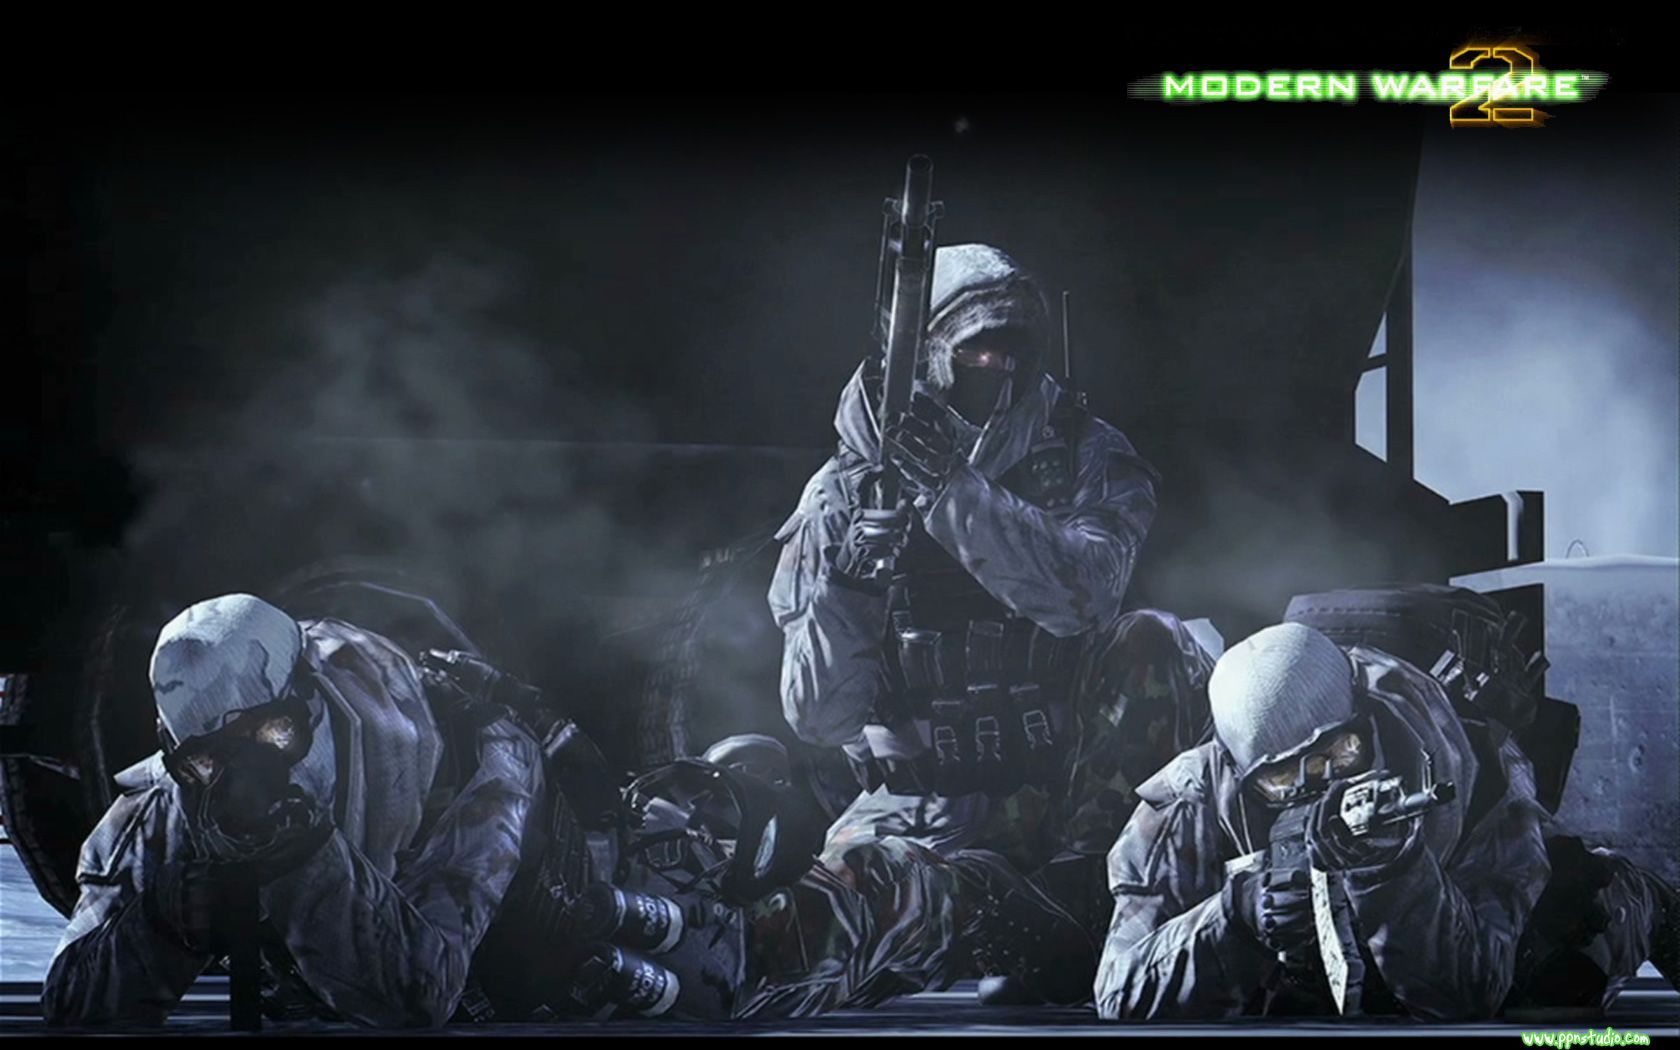 Games: Call of Duty 4: Modern Warfare, picture nr. 35169